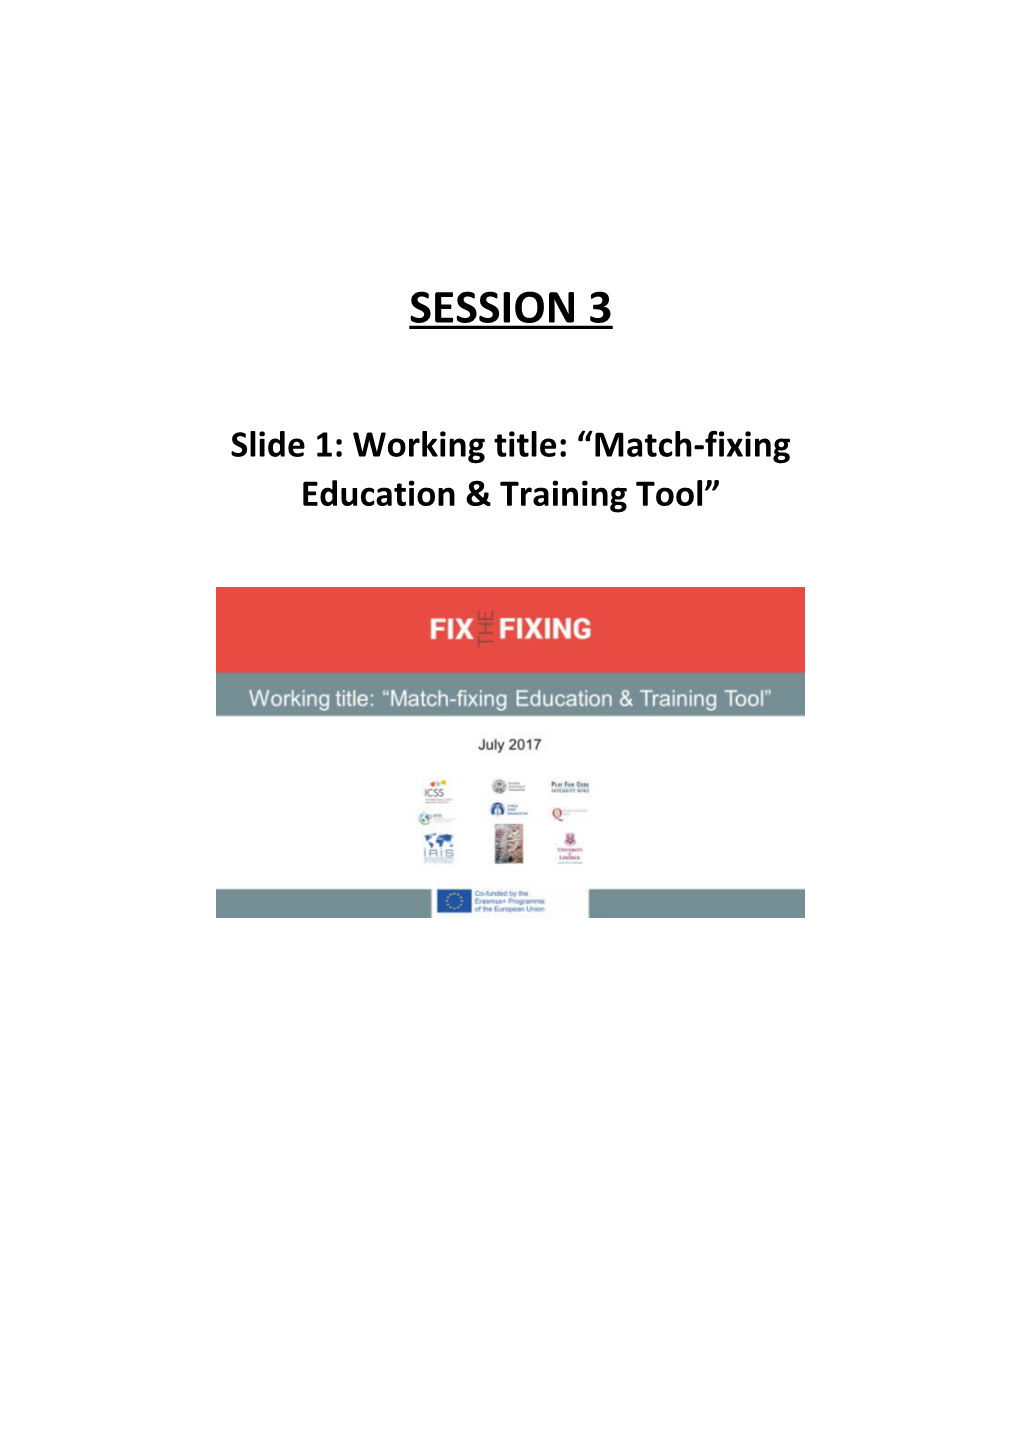 Slide 1: Working Title: Match-Fixing Education & Training Tool